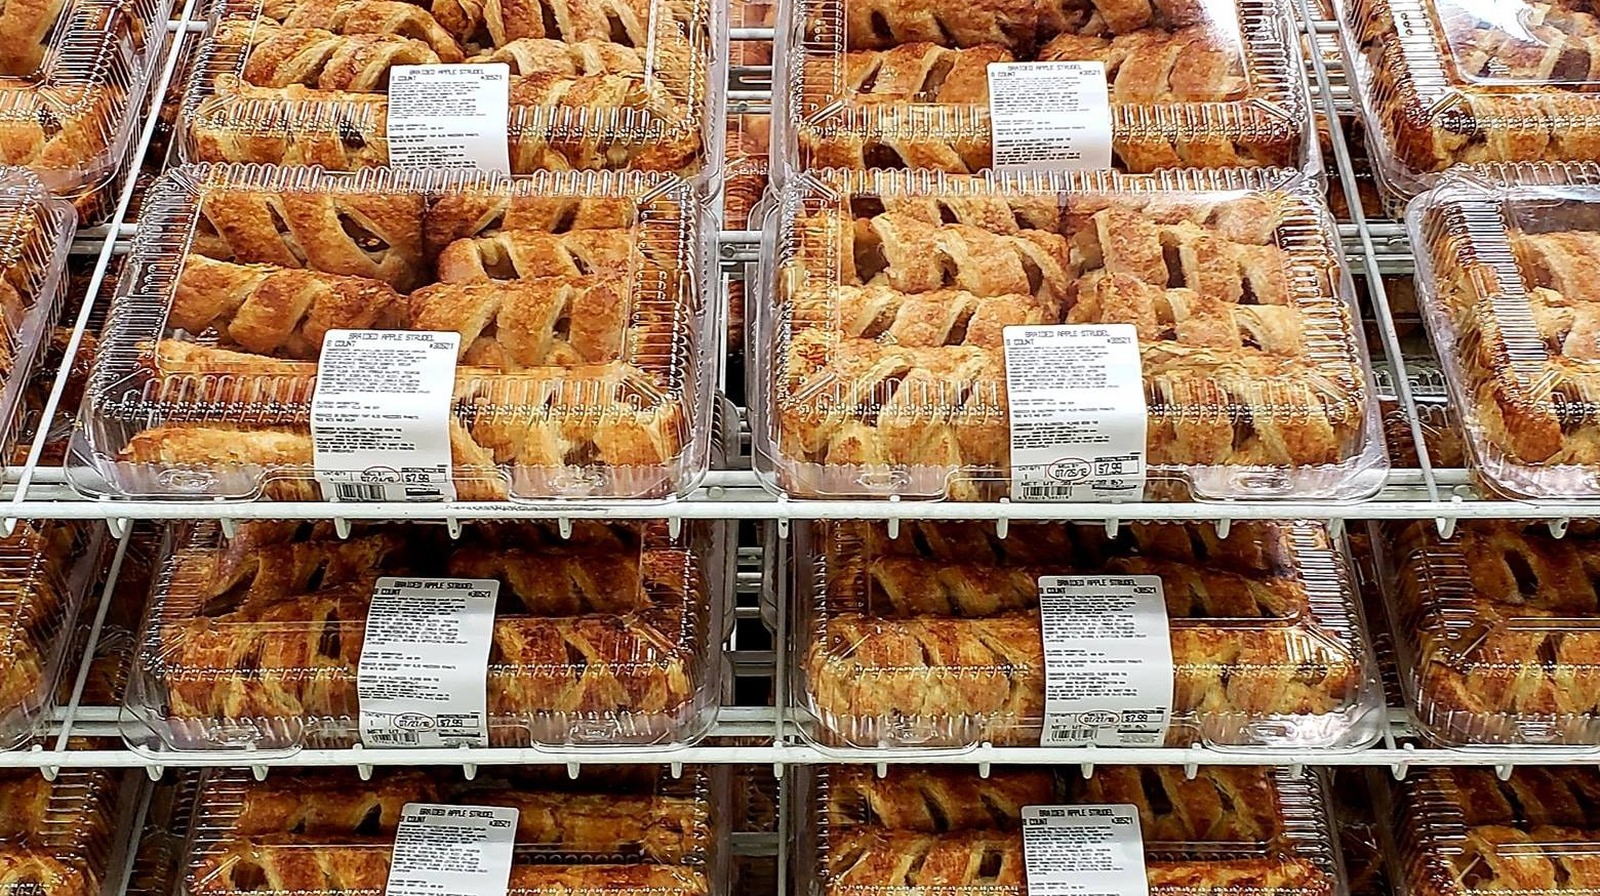 Popular Costco Bakery Items Ranked From Worst To Best